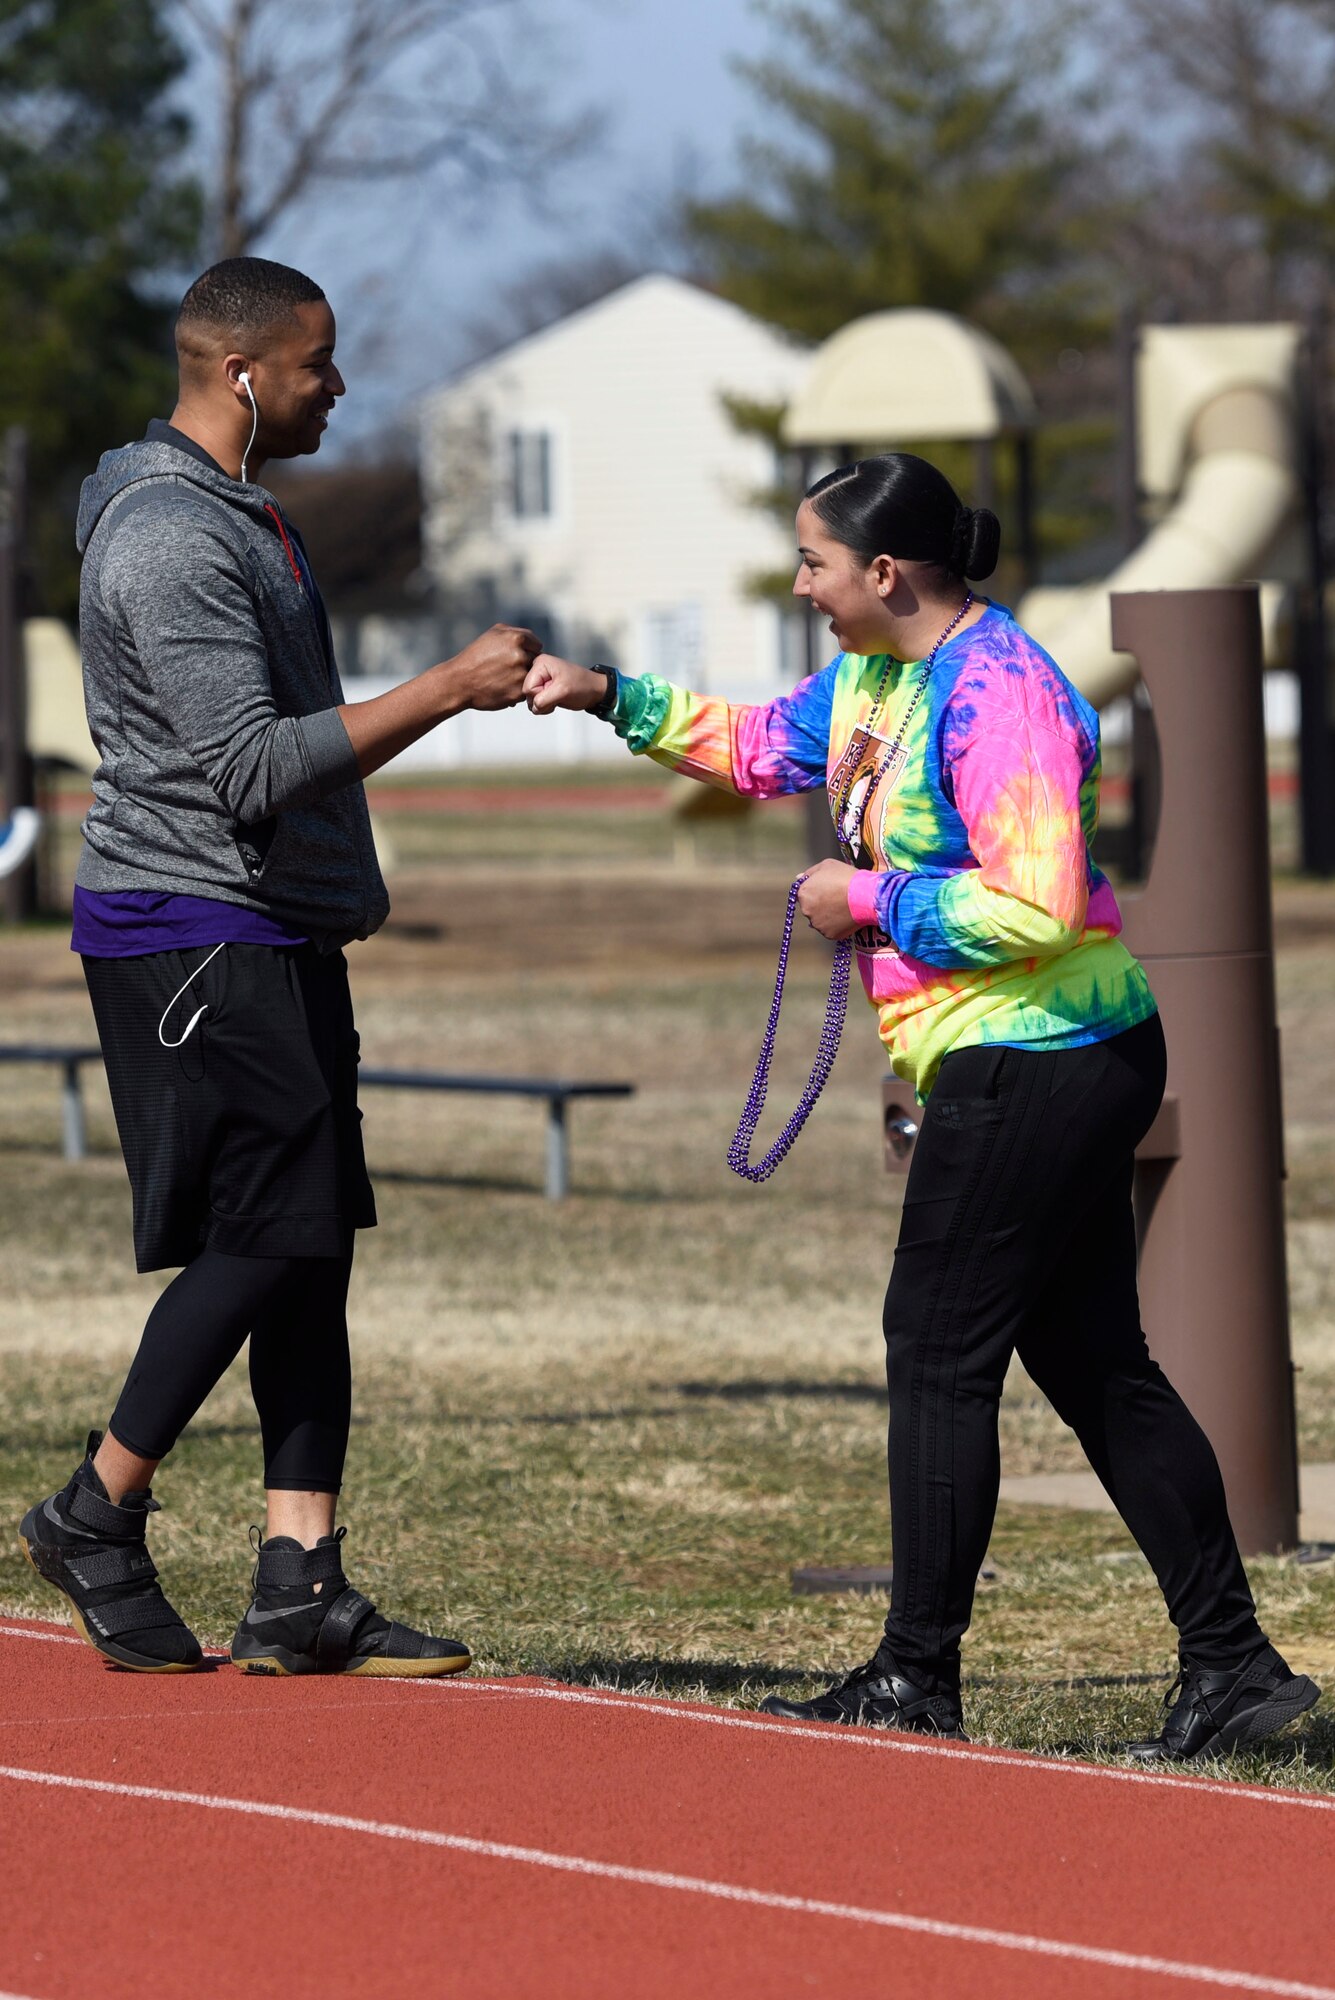 U.S. Air Force Master Sgt. Cornelius Horne, 316th Force Support Squadron career assistance advisor and Diversity and Inclusion chair, left, and U.S. Air Force Tech. Sgt. Krystal Molina, 459th Air Refueling Wing Equal Opportunity specialist, greet each other at Joint Base Andrews, Md., March 5, 2022